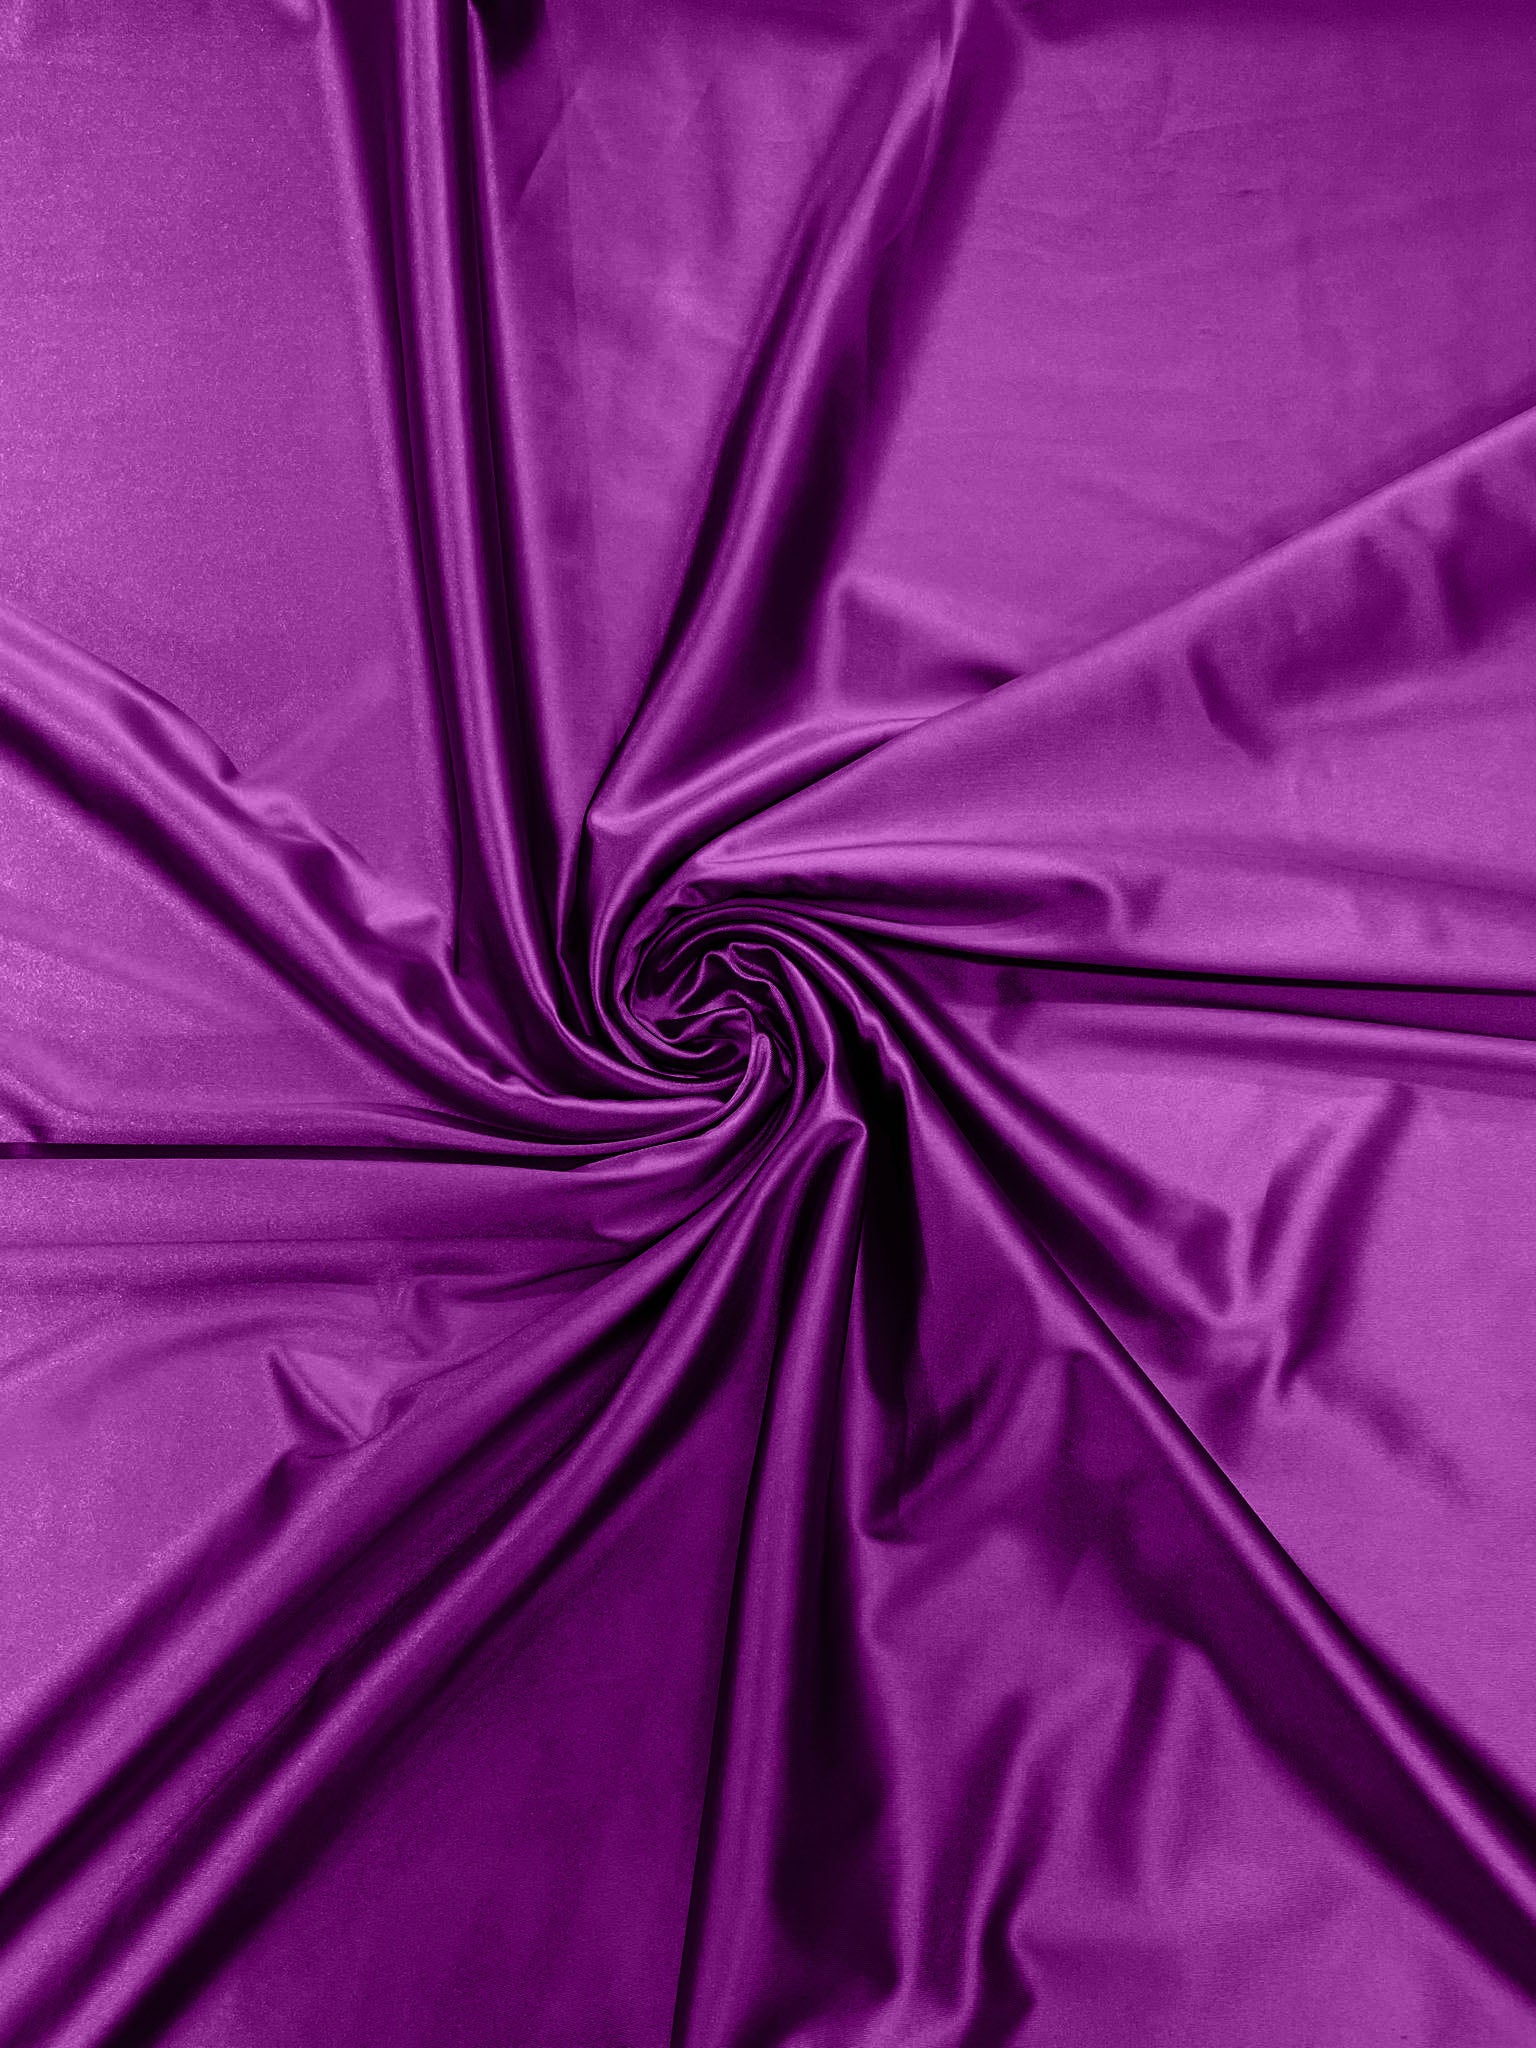 Pink Purple Heavy Shiny Satin Stretch Spandex Fabric/58 Inches Wide/Prom/Wedding/Cosplays.